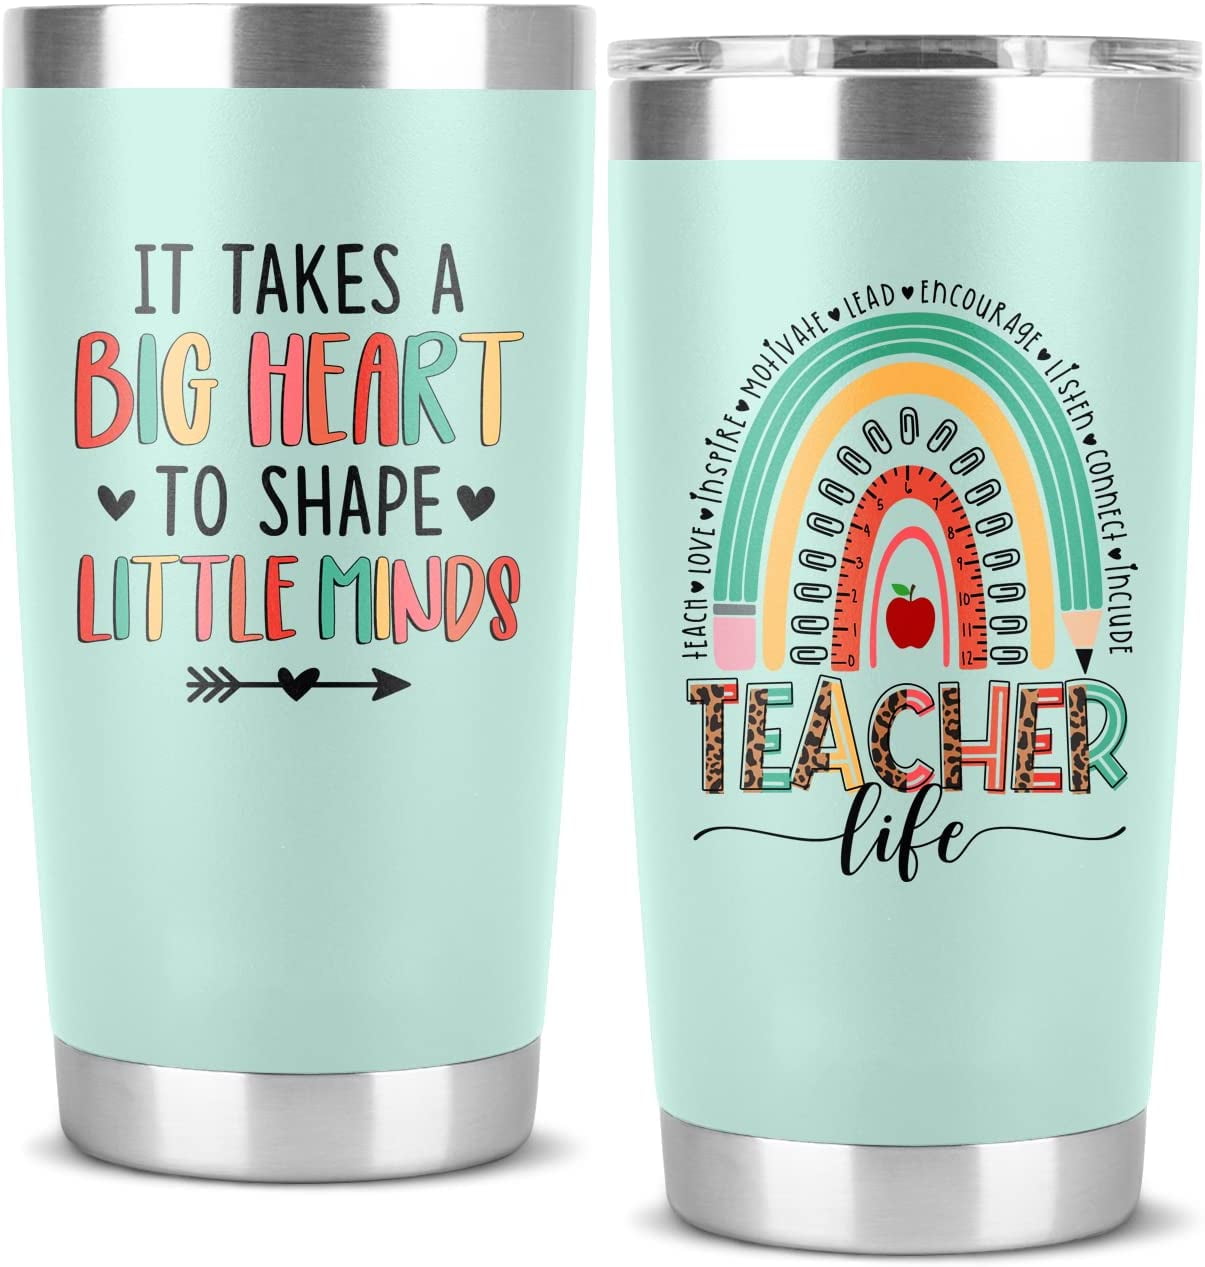 35 Incredibly Useful Gifts For Teachers They'll Actually Love - Diana Maria  & Co